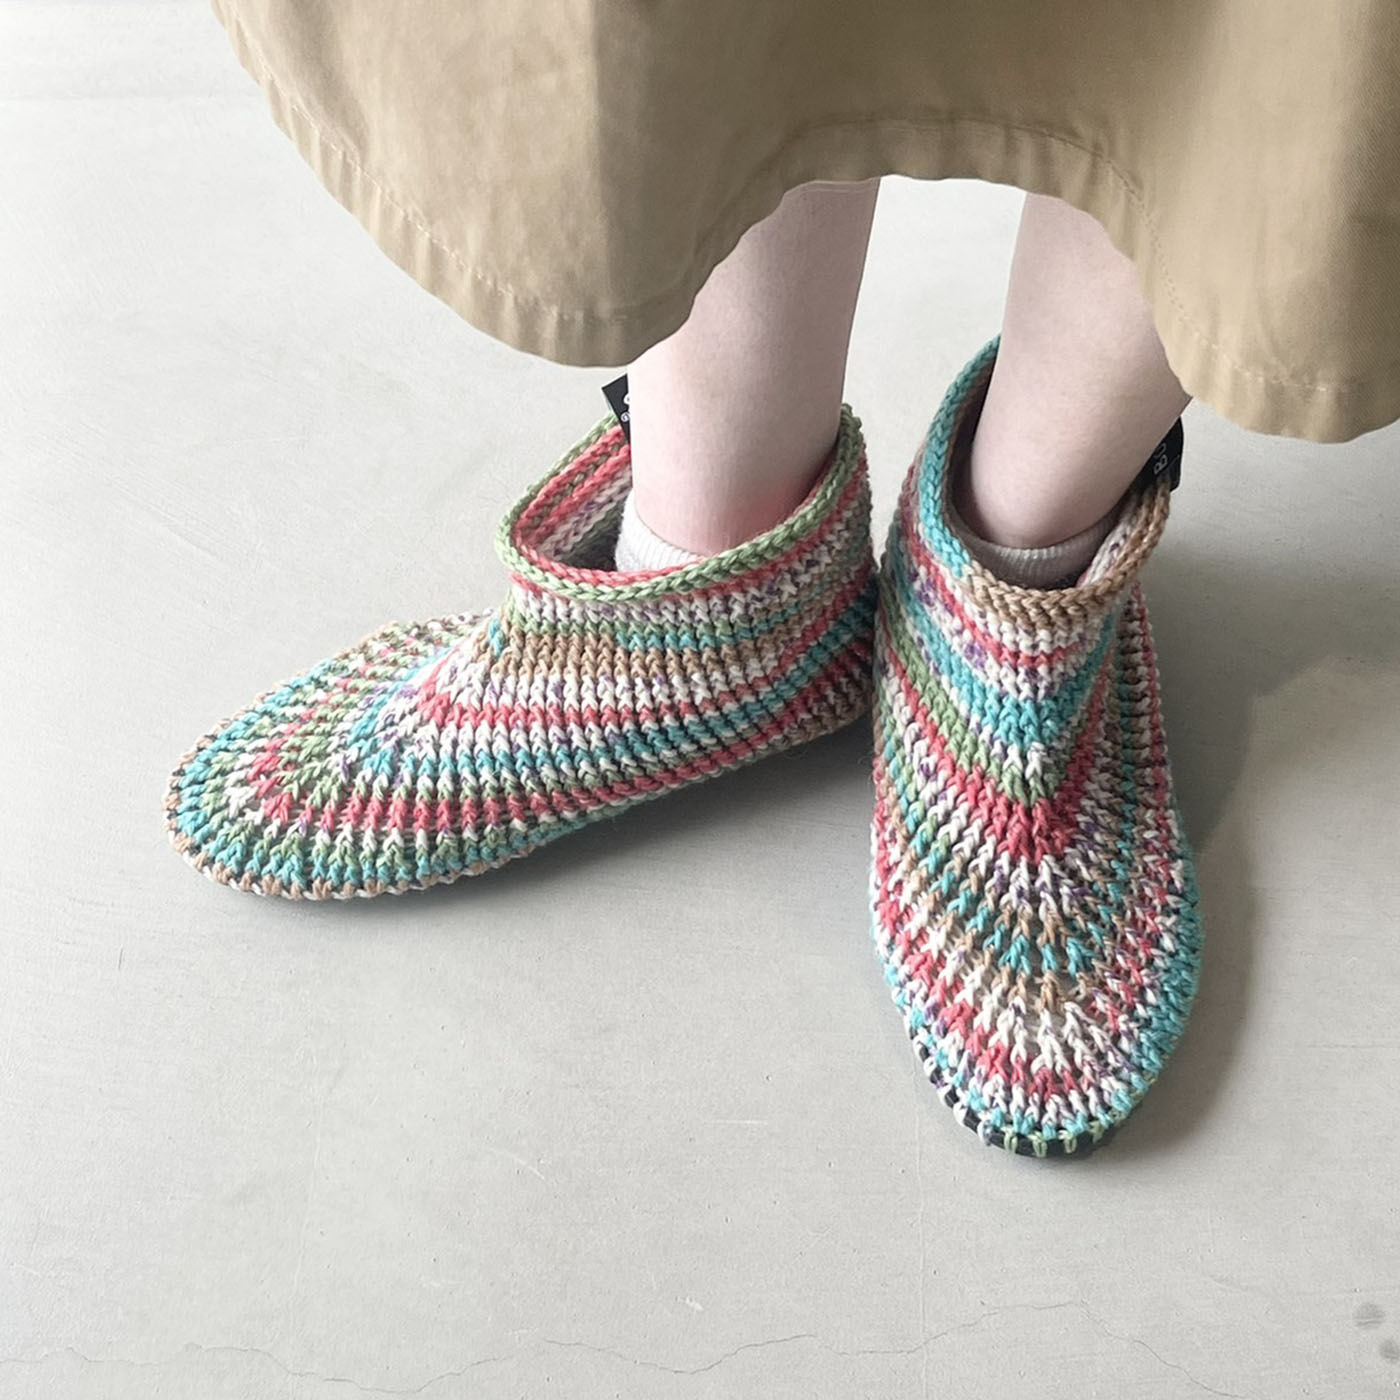 Couturier special|かぎ針で編む　Ｂｏｔｔｉｅｓ〈ボッティーズ〉ニットシューズキット|１，４，ロデオ